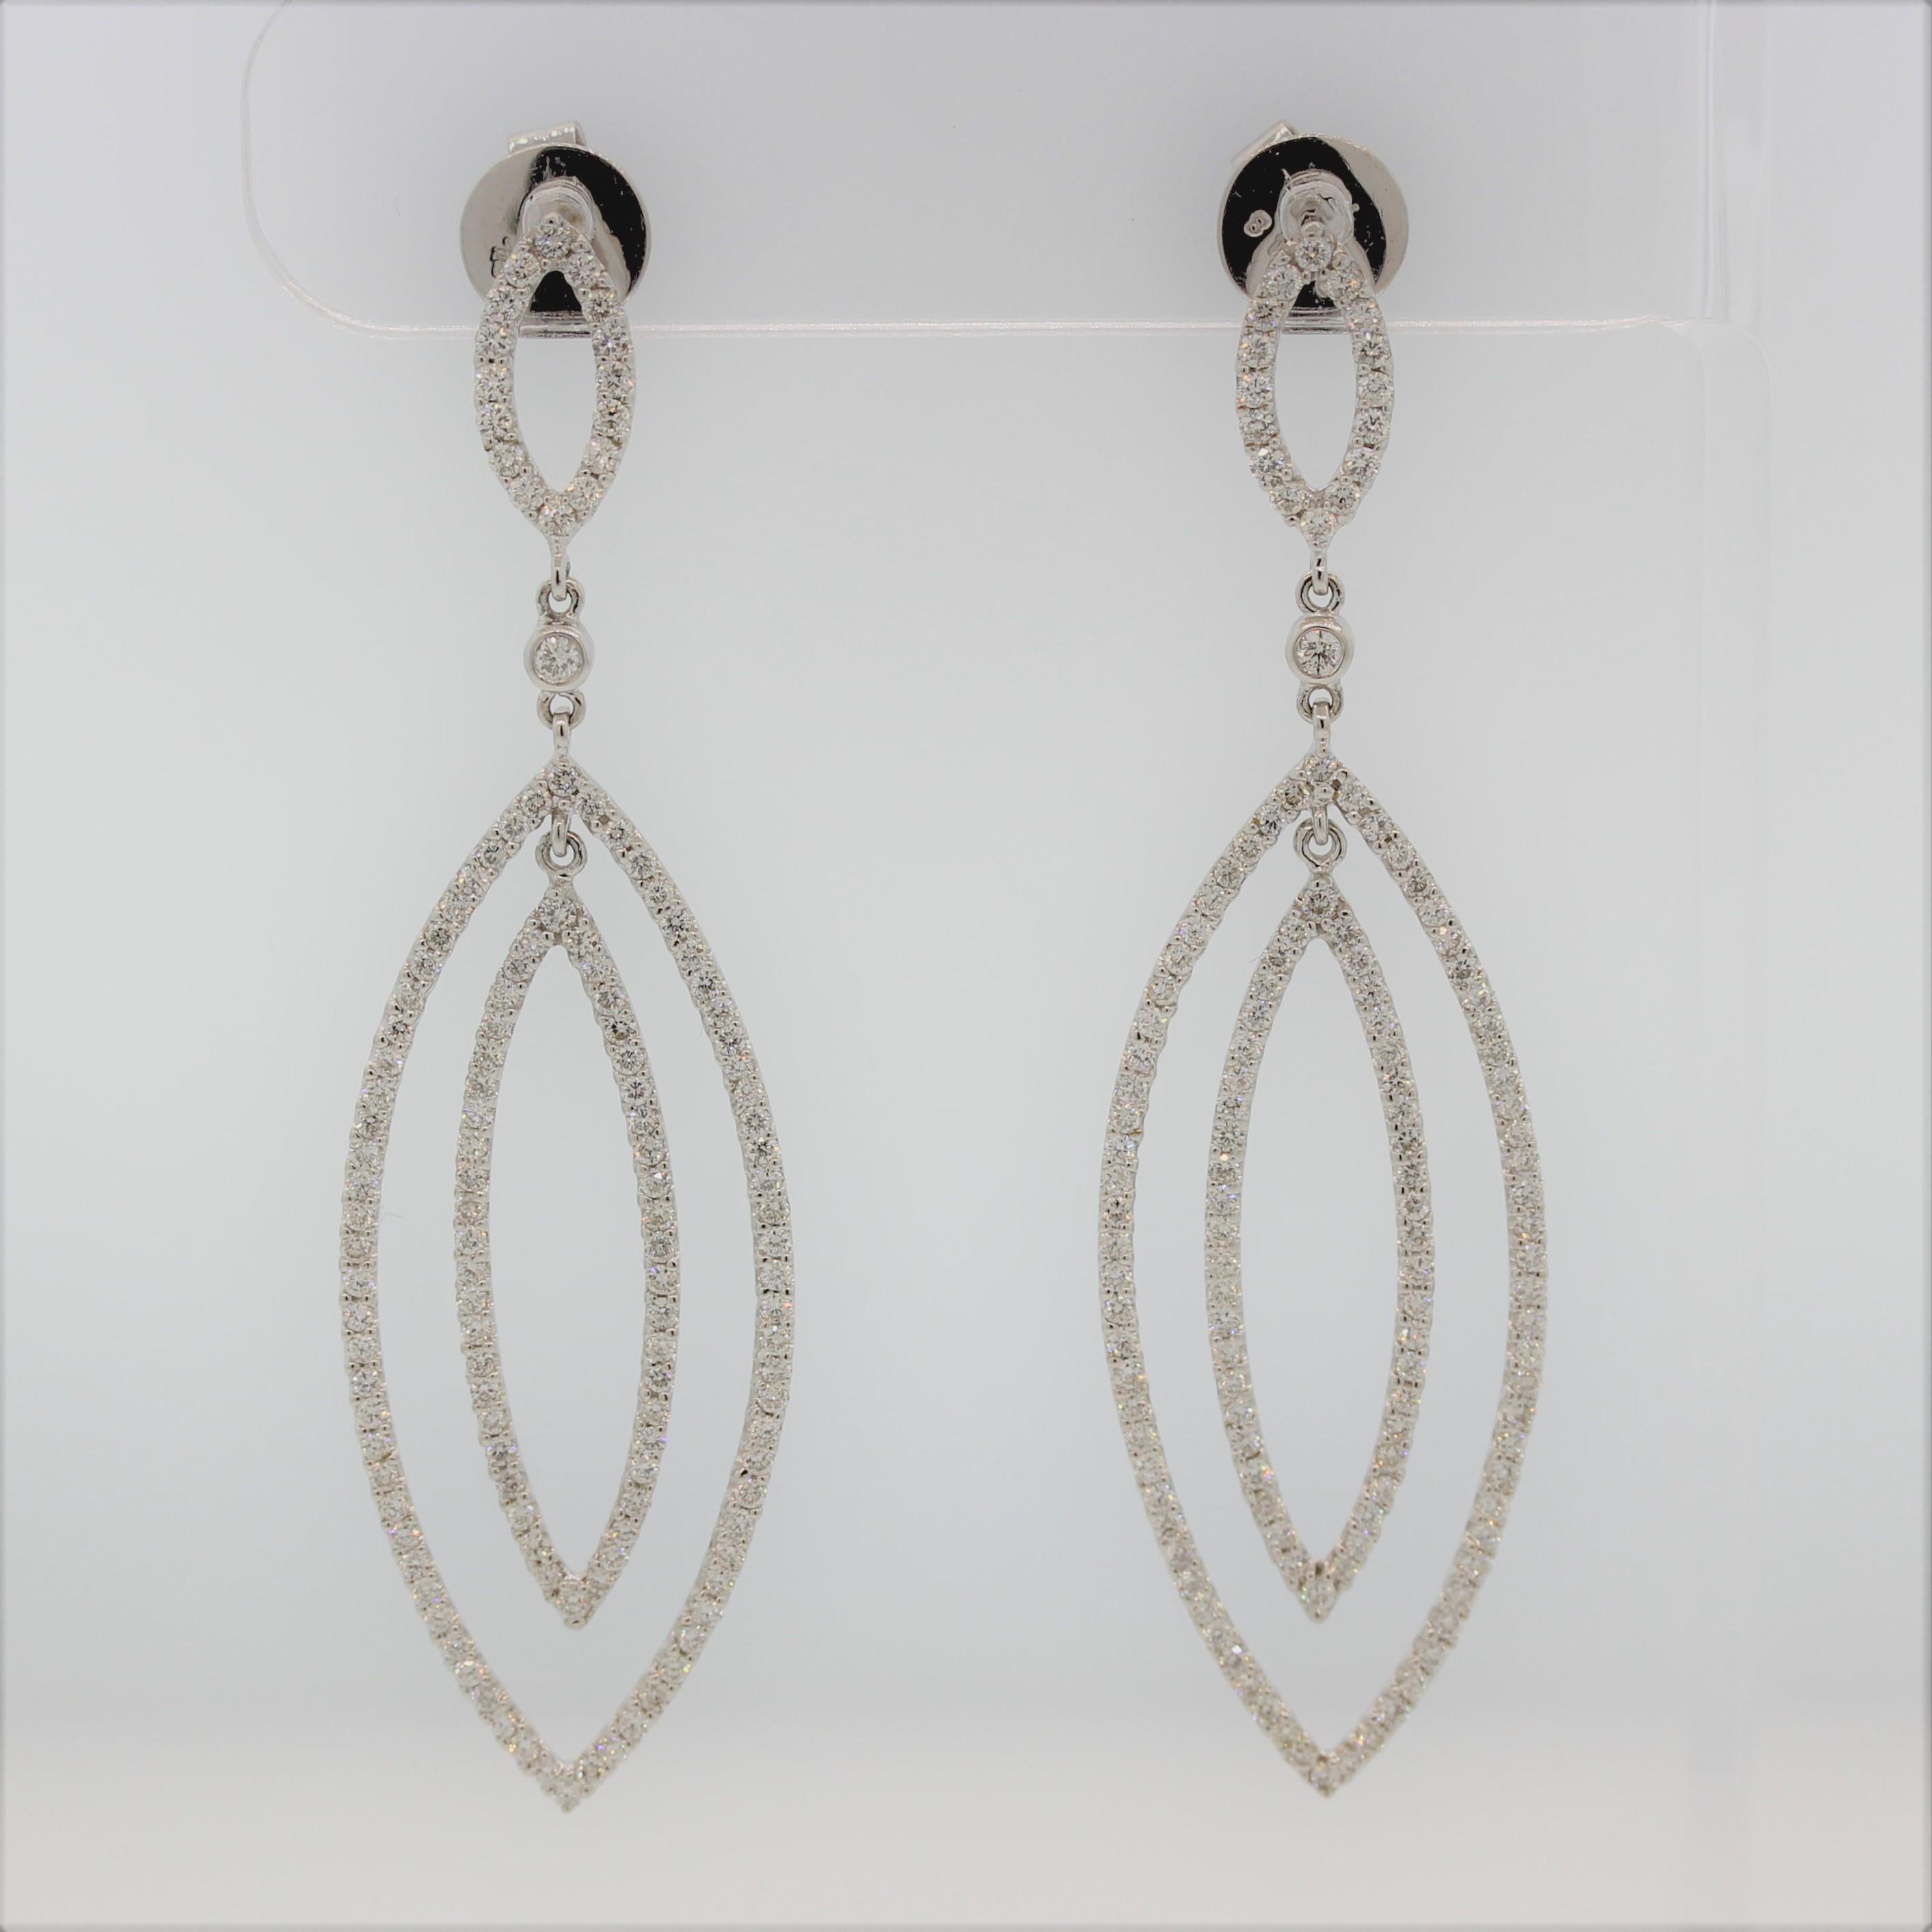 A wonderful pair of drop earrings! They feature 2.48 carats of round brilliant cut diamonds set in 3 marquise shaped gold fixtures, with 2 of them being drops. Made in 18k white gold, these long drop earrings will take any outfit to the next